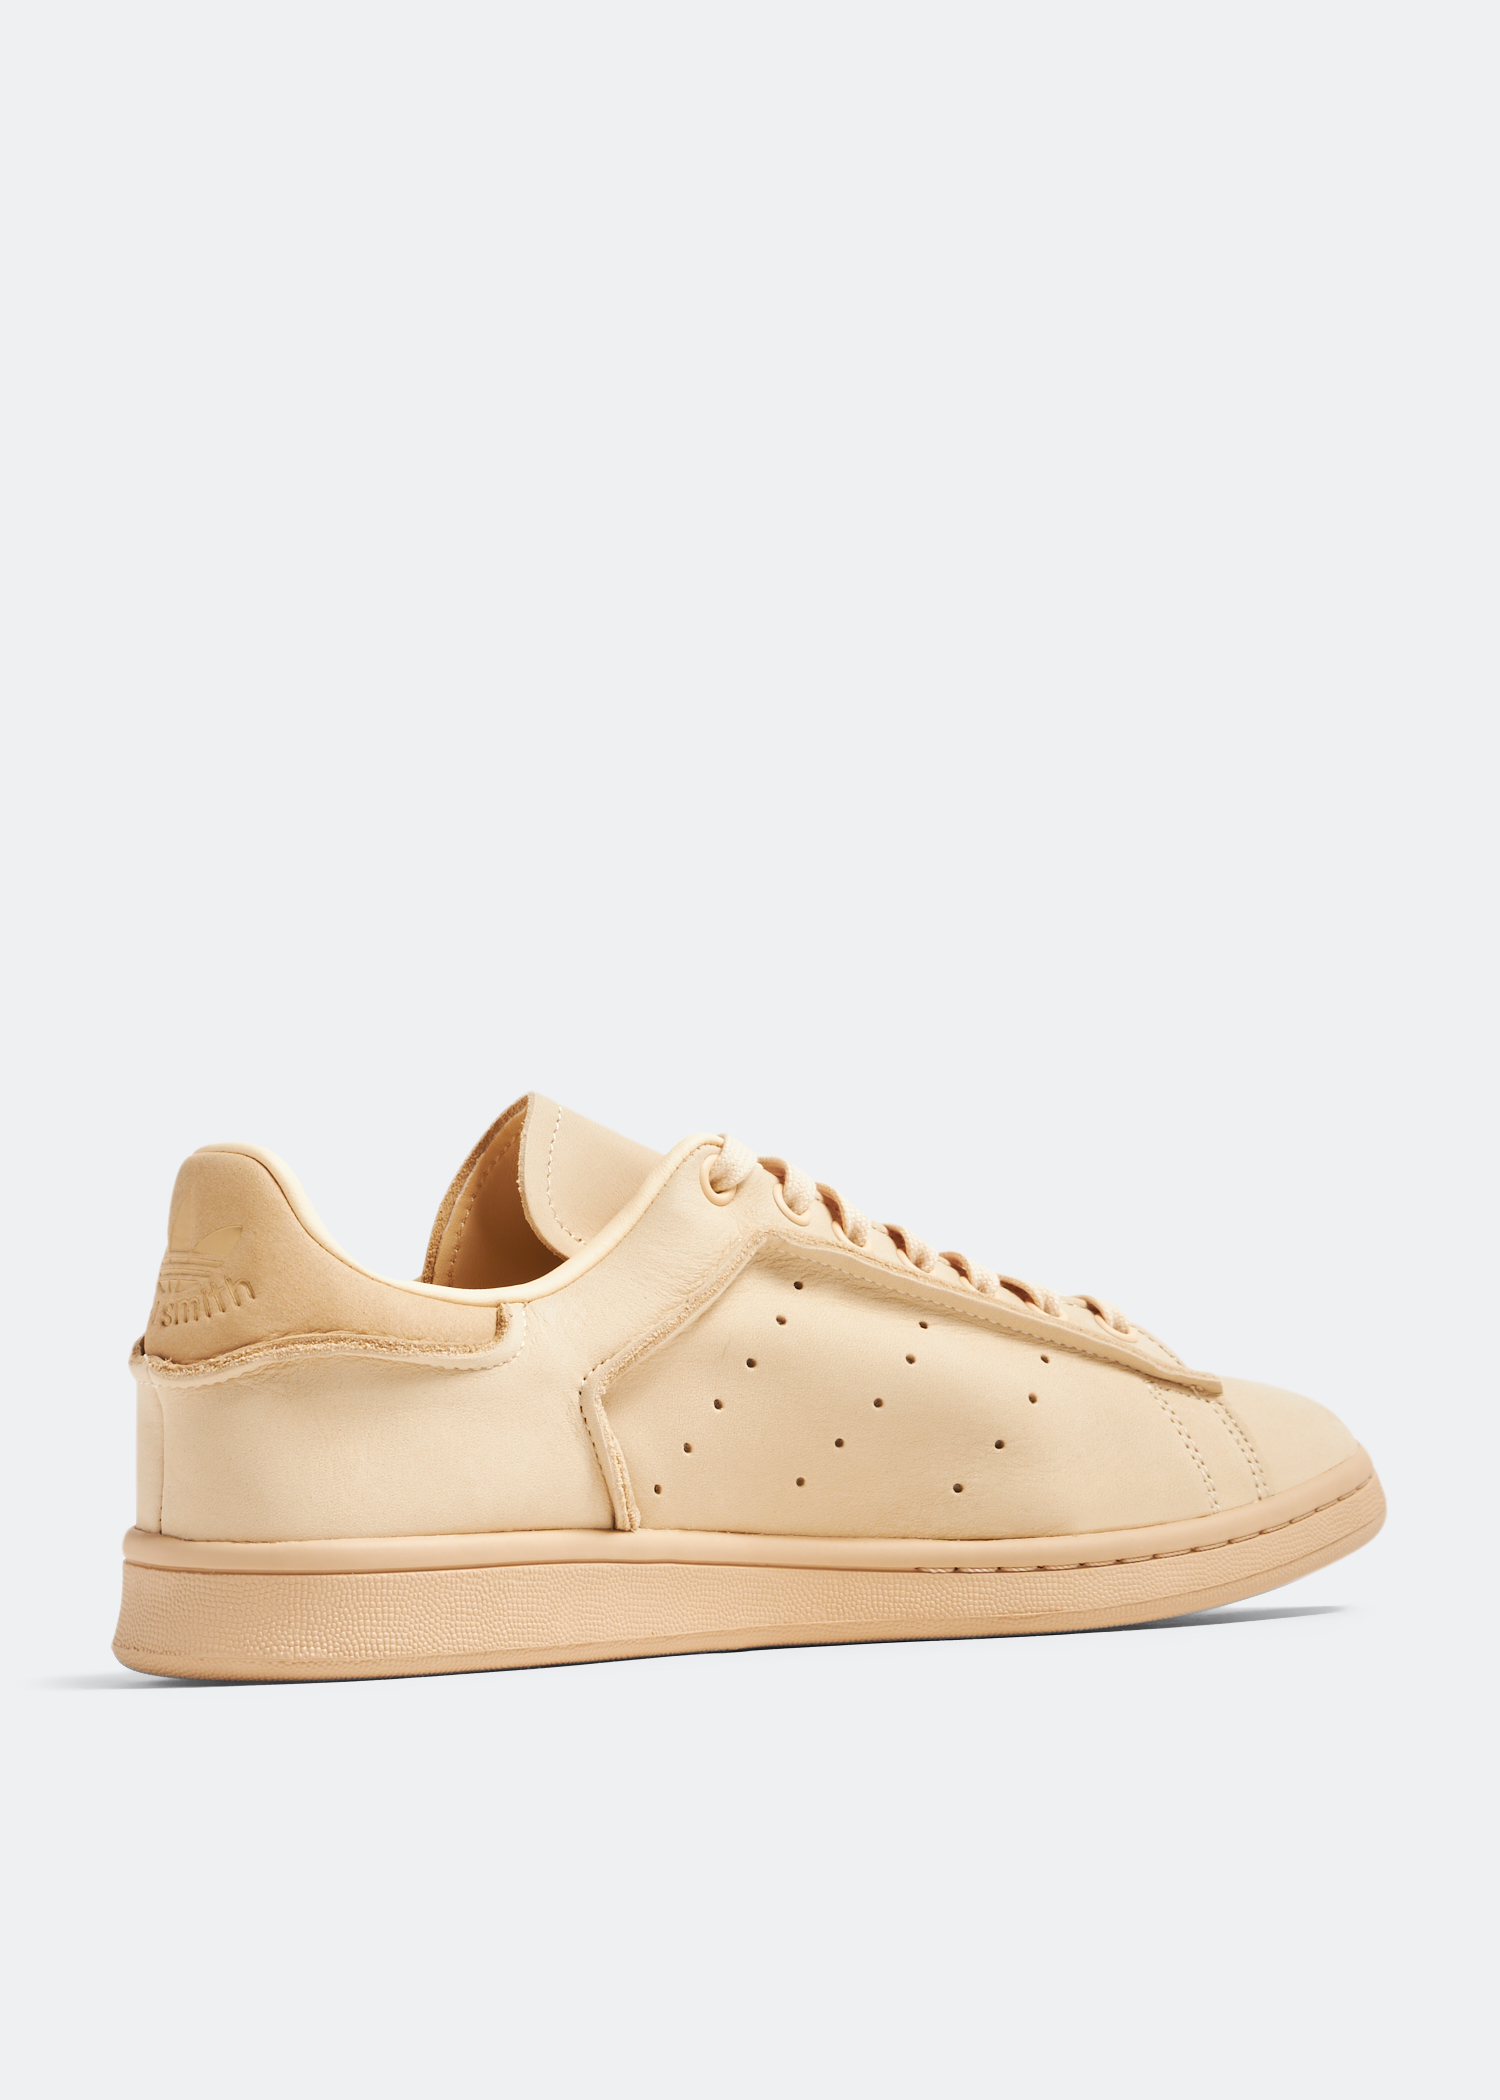 Adidas Stan Smith Lux sneakers for Men - Beige in UAE | Level Shoes